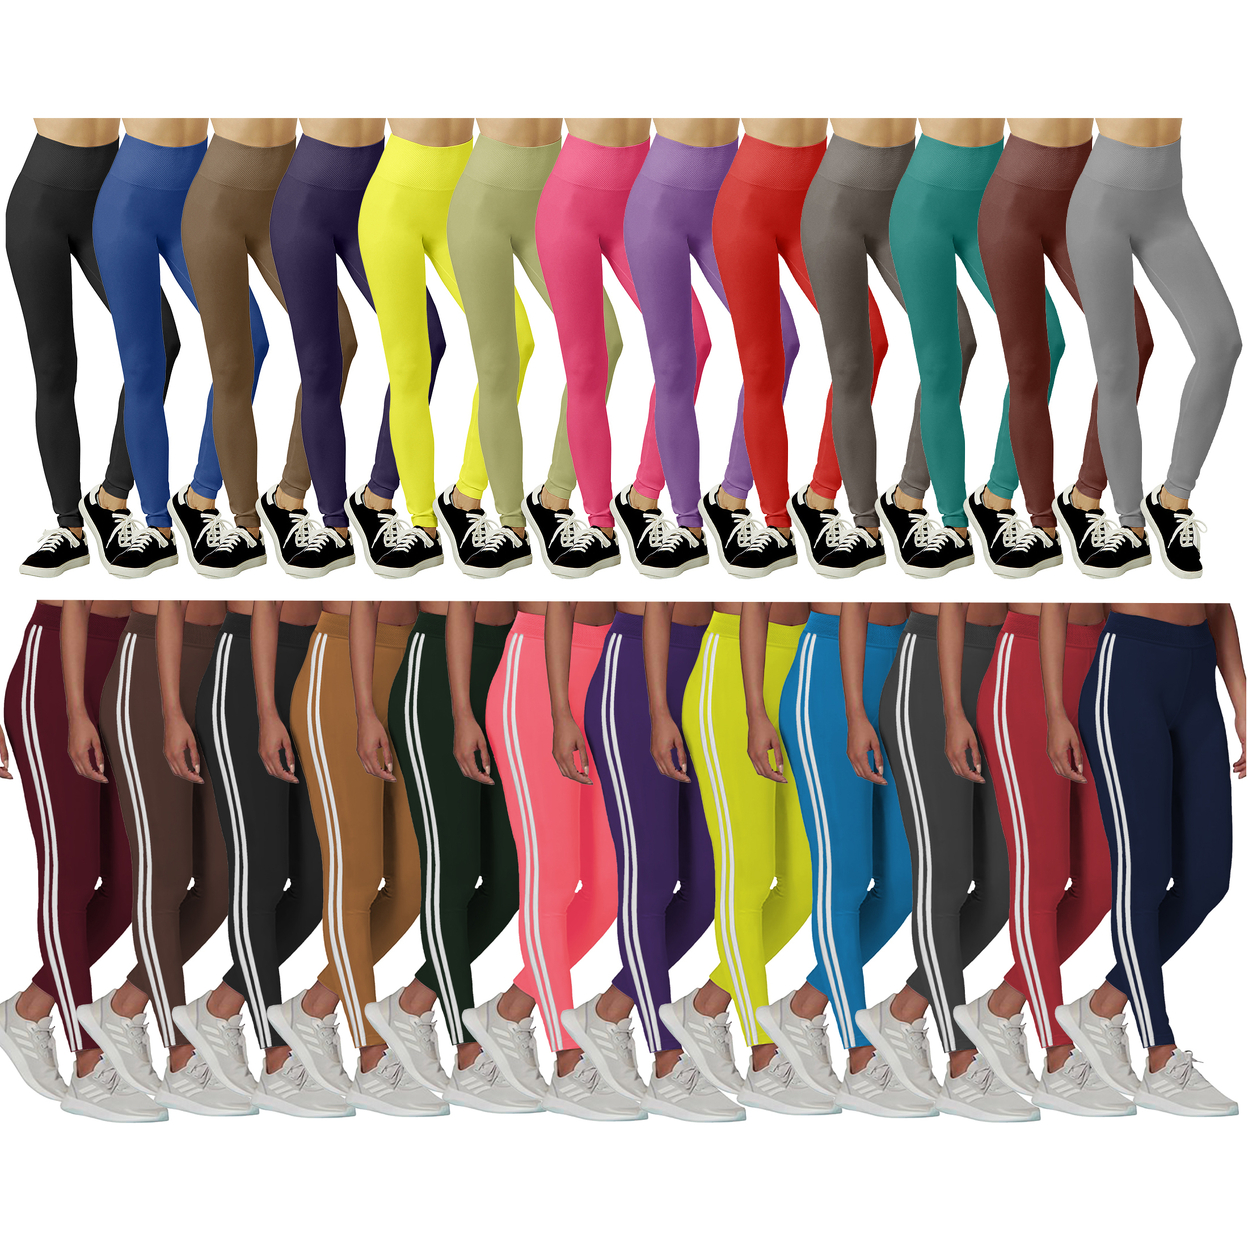 5-Pack: Women's Ultra-Soft Smooth High Waisted Fleece Lined Winter Warm Cozy Leggings - Striped, Small/medium